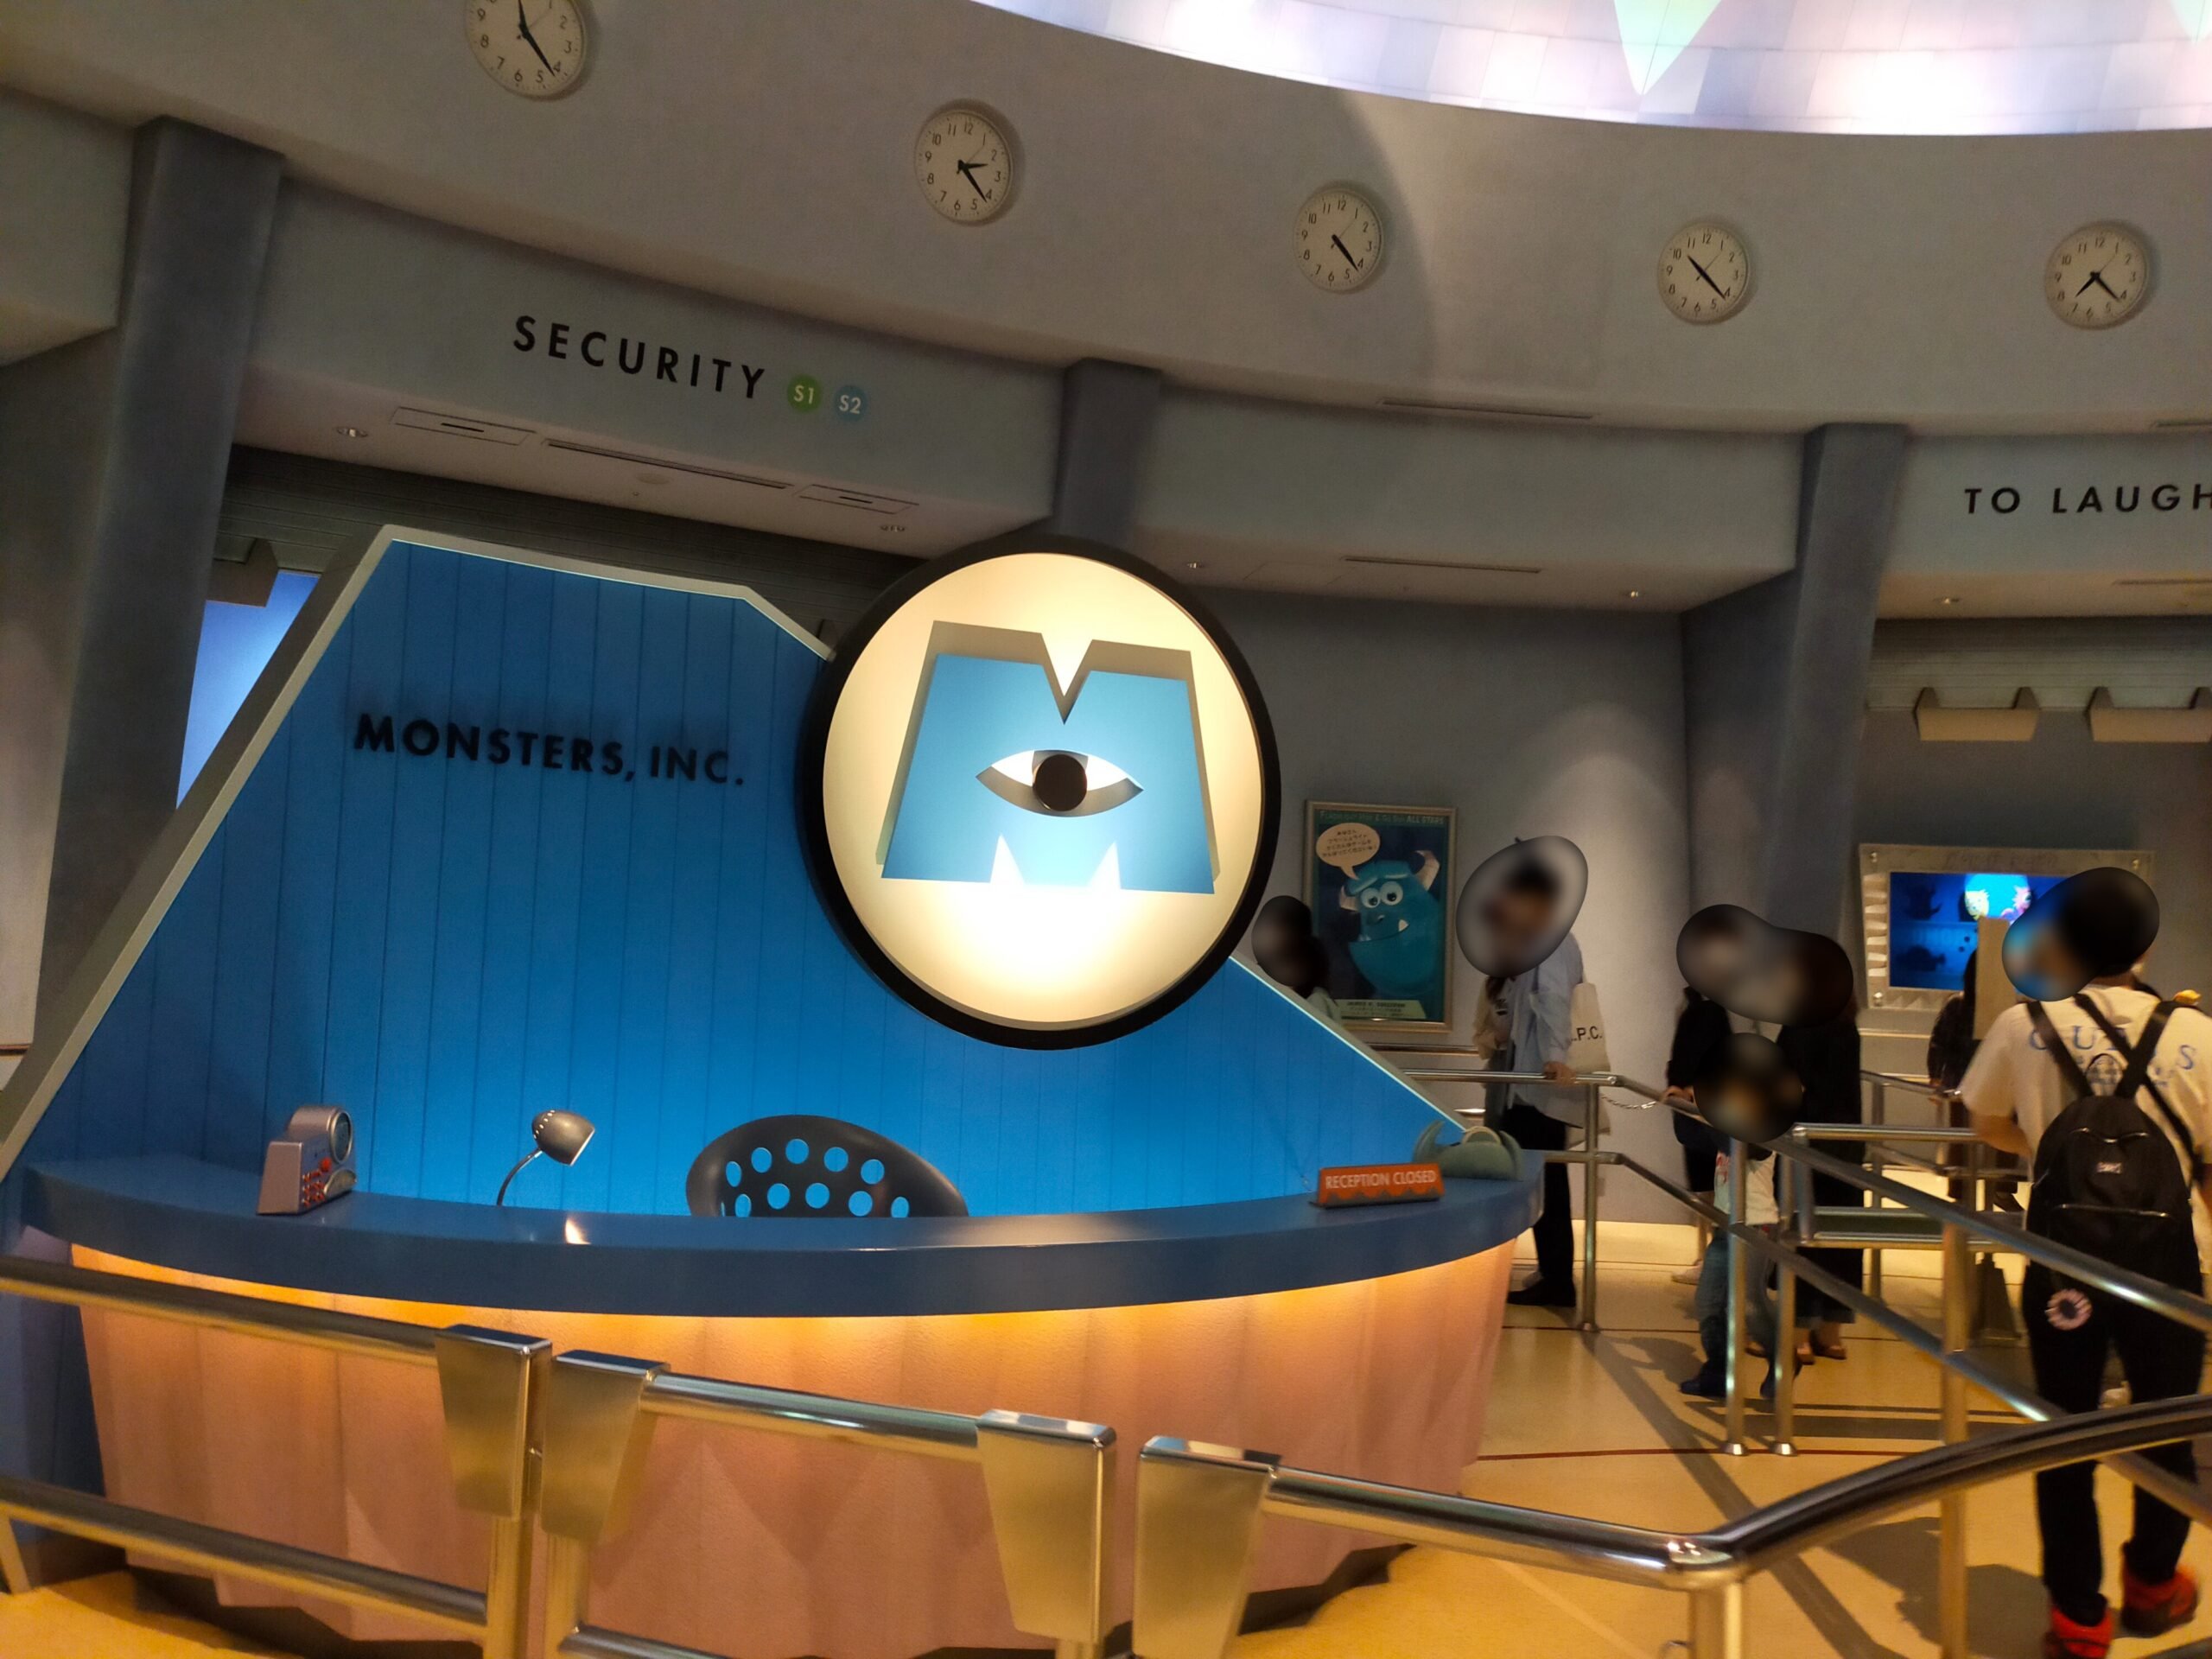 Great Details in the Monsters, Inc. Queue